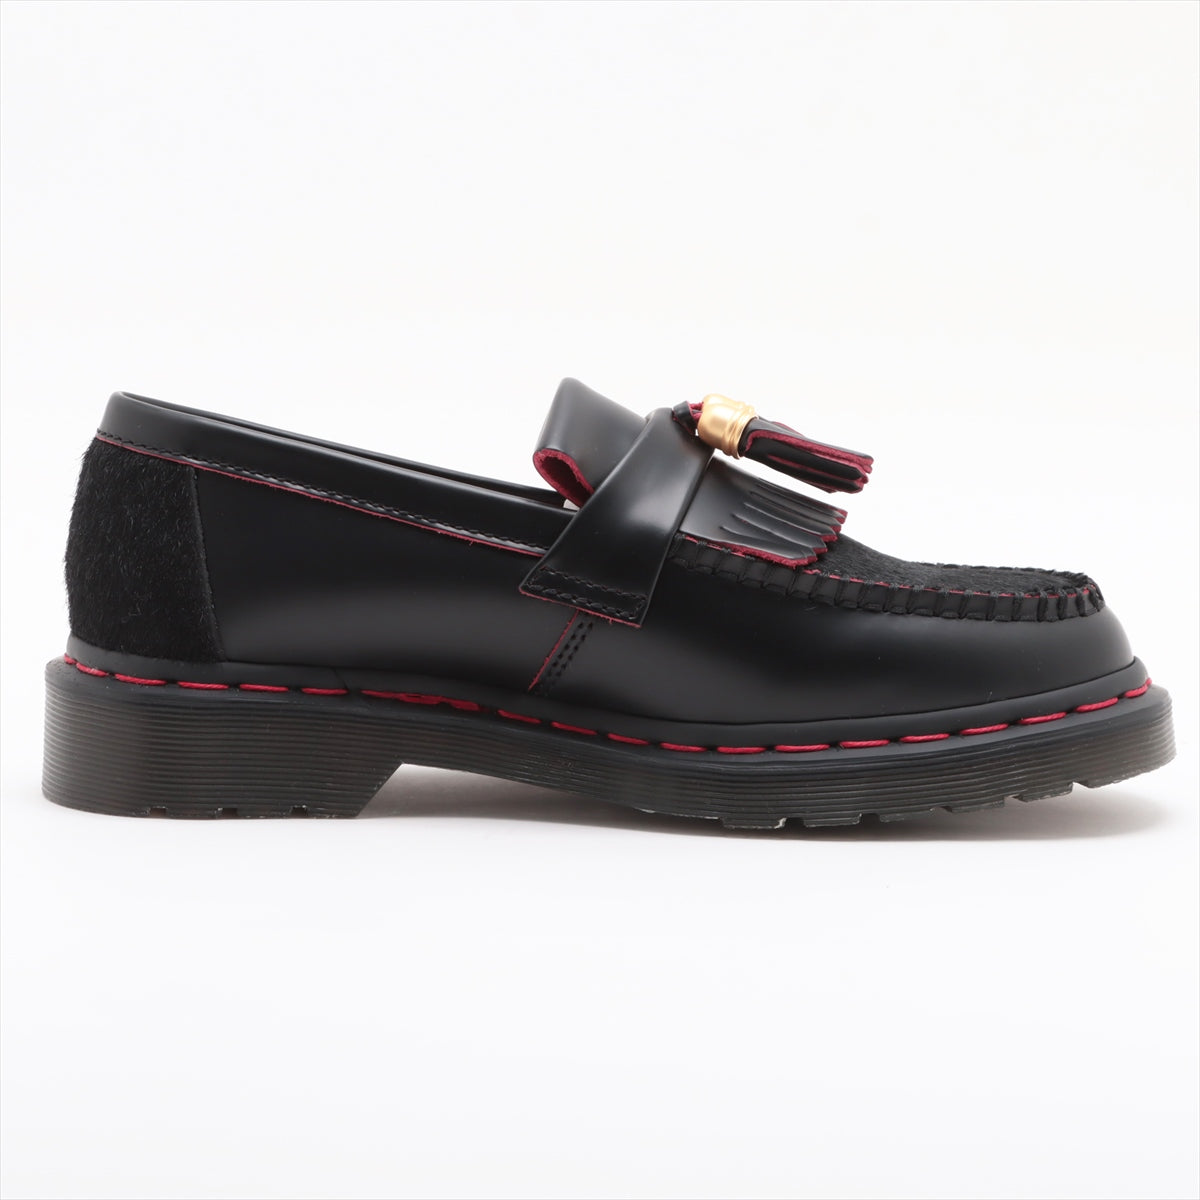 Dr. Martens 24SS Leather & unborn calf Loafer UK5 Ladies' Black x red Adrian tassels YEAR OF THE DRAGON